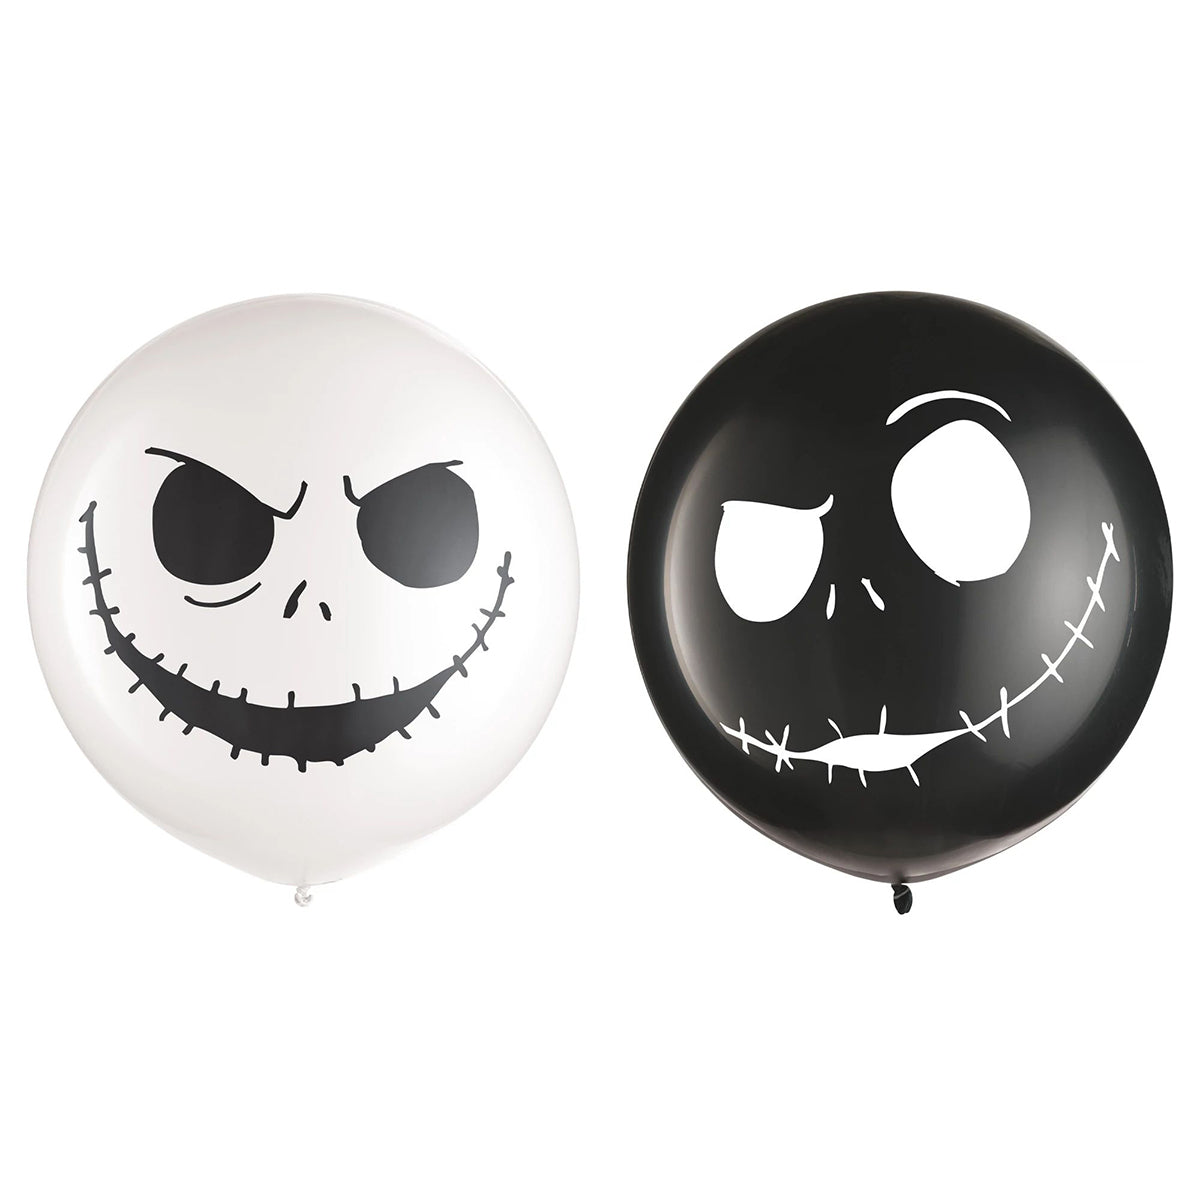 The Nightmare Before Christmas Printed Latex Balloons, Black and White, 24 Inches, 2 Count